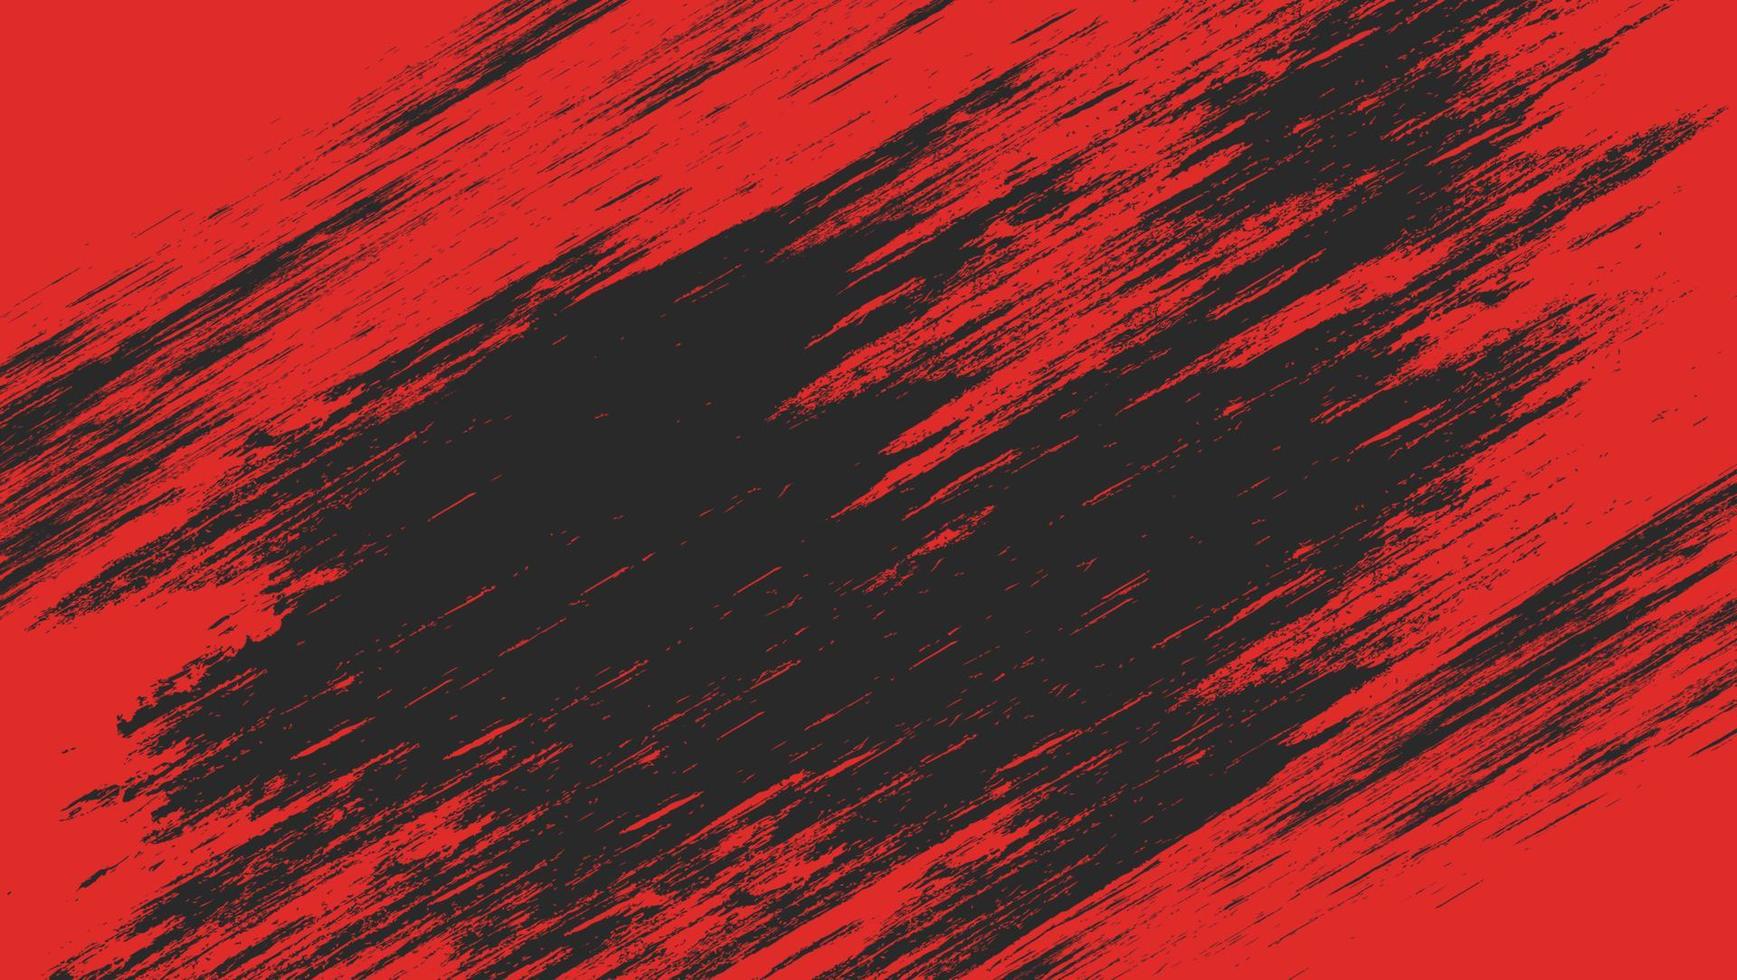 Abstract Black Red Grunge Design Texture Background vector